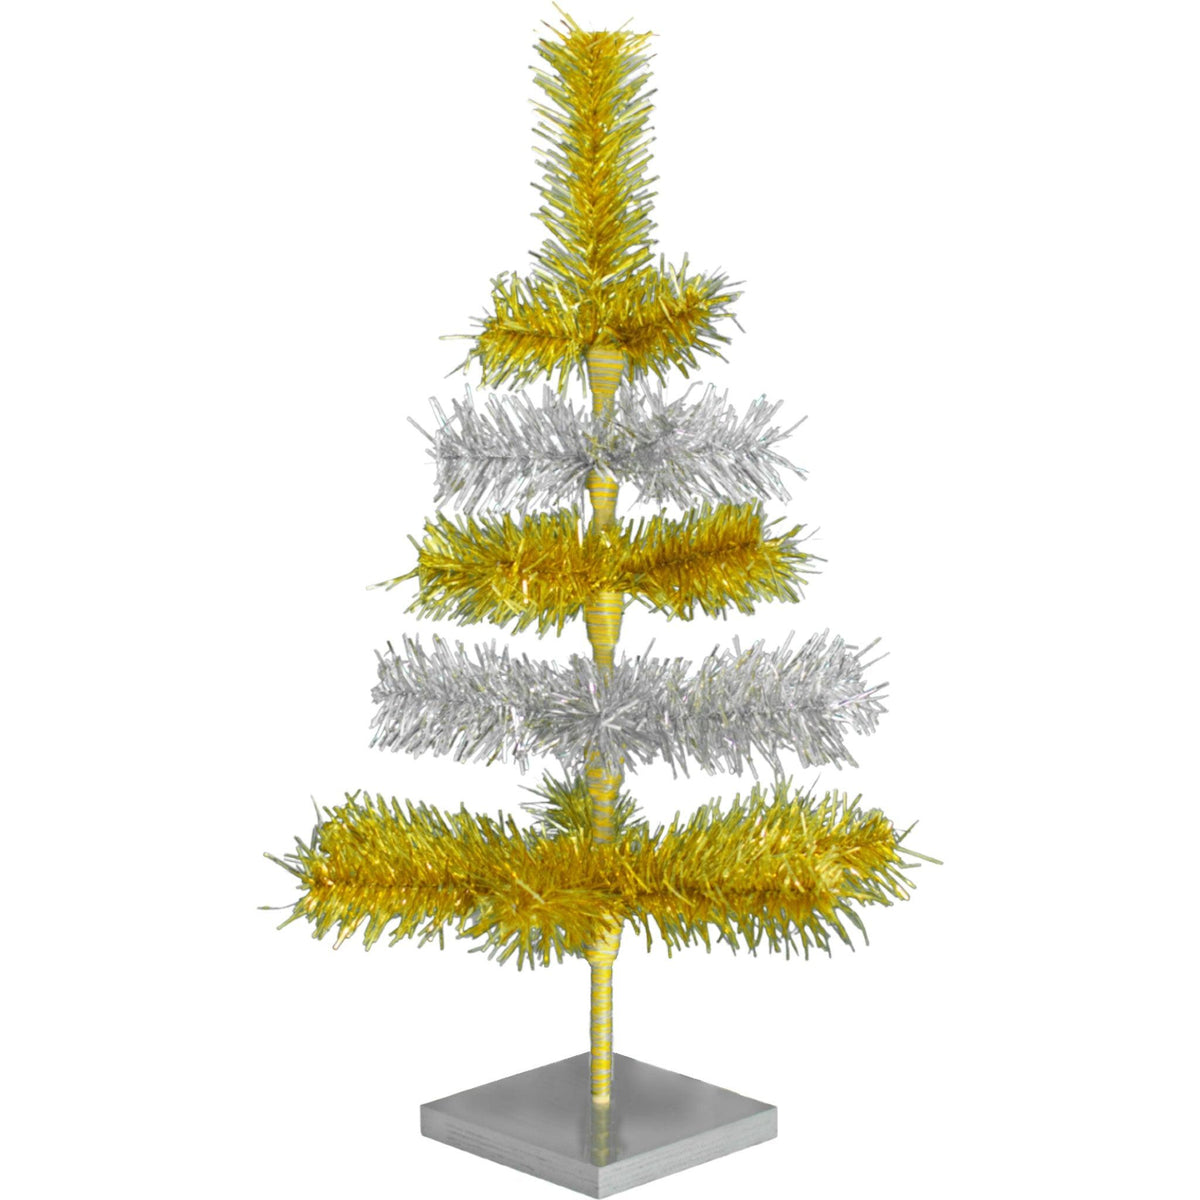 18in tall Shiny Gold and Metallic Silver Layered Tinsel Christmas Trees on sale at leedisplay.com